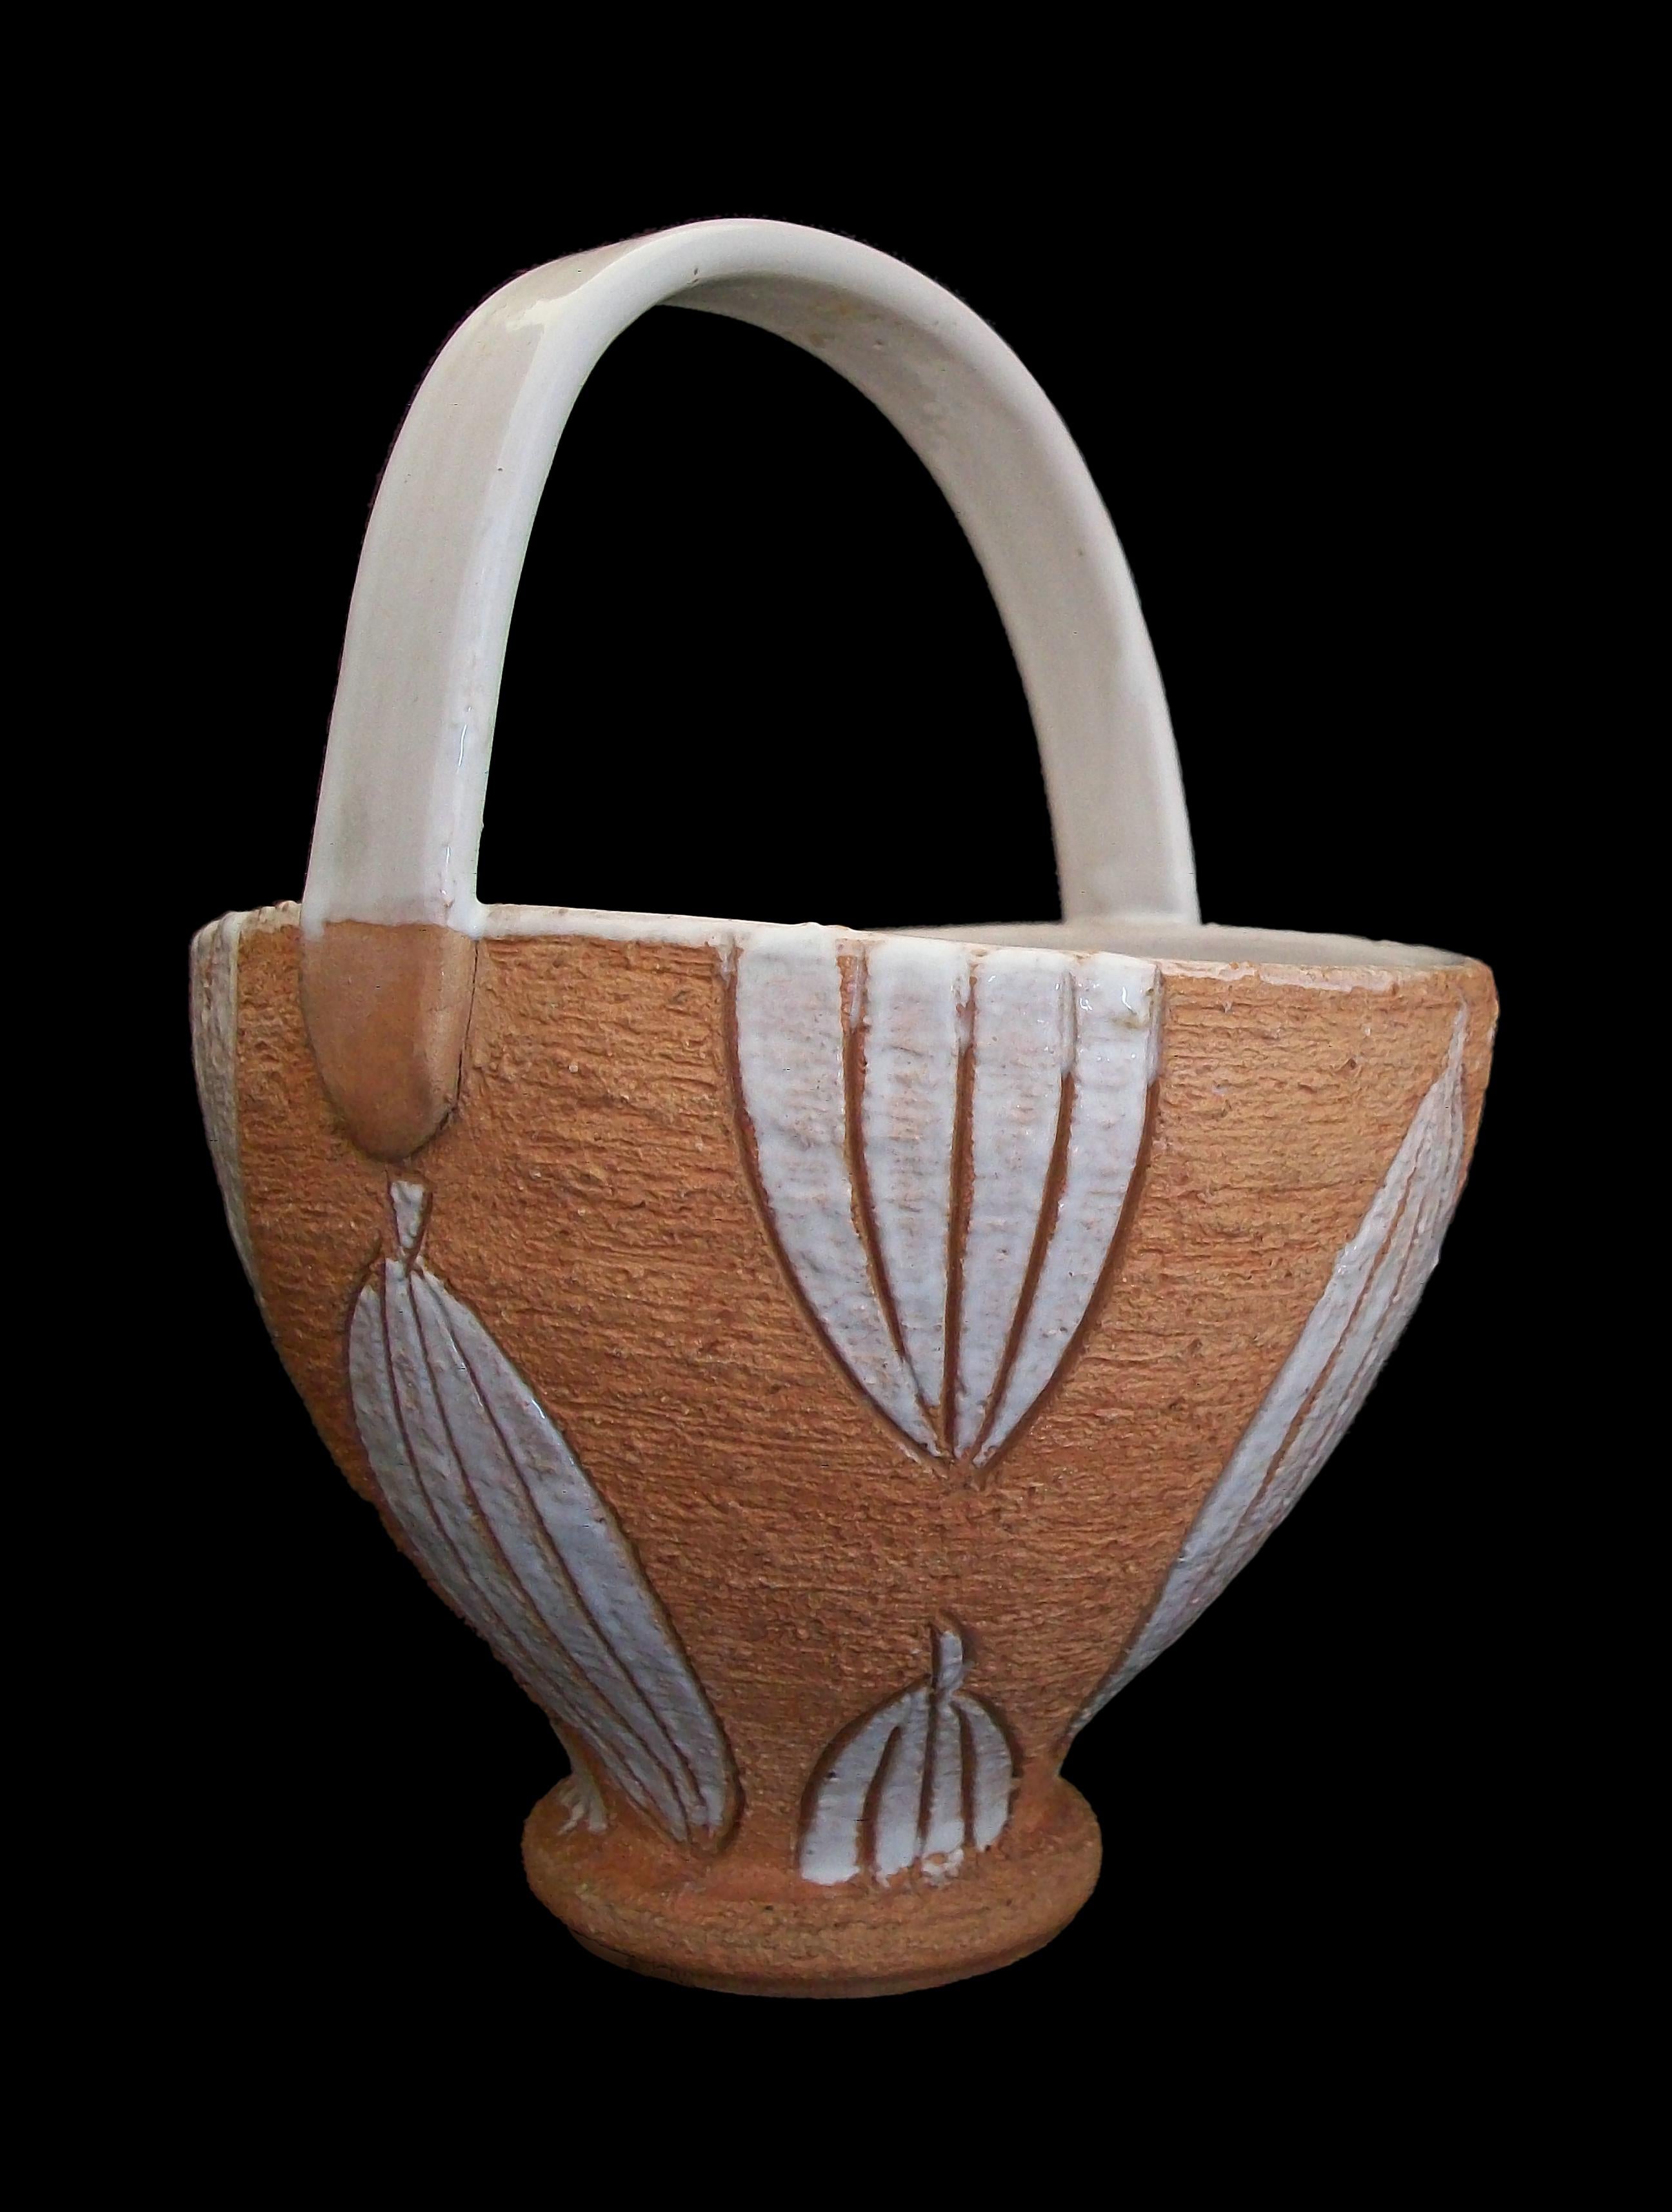 HORIZON - Mid Century studio pottery basket / bowl / vase with white glazed handle and interior - hand made - featuring incised and white glazed leaves to the exterior of the bowl - unglazed textured finish to the exterior - original paper label